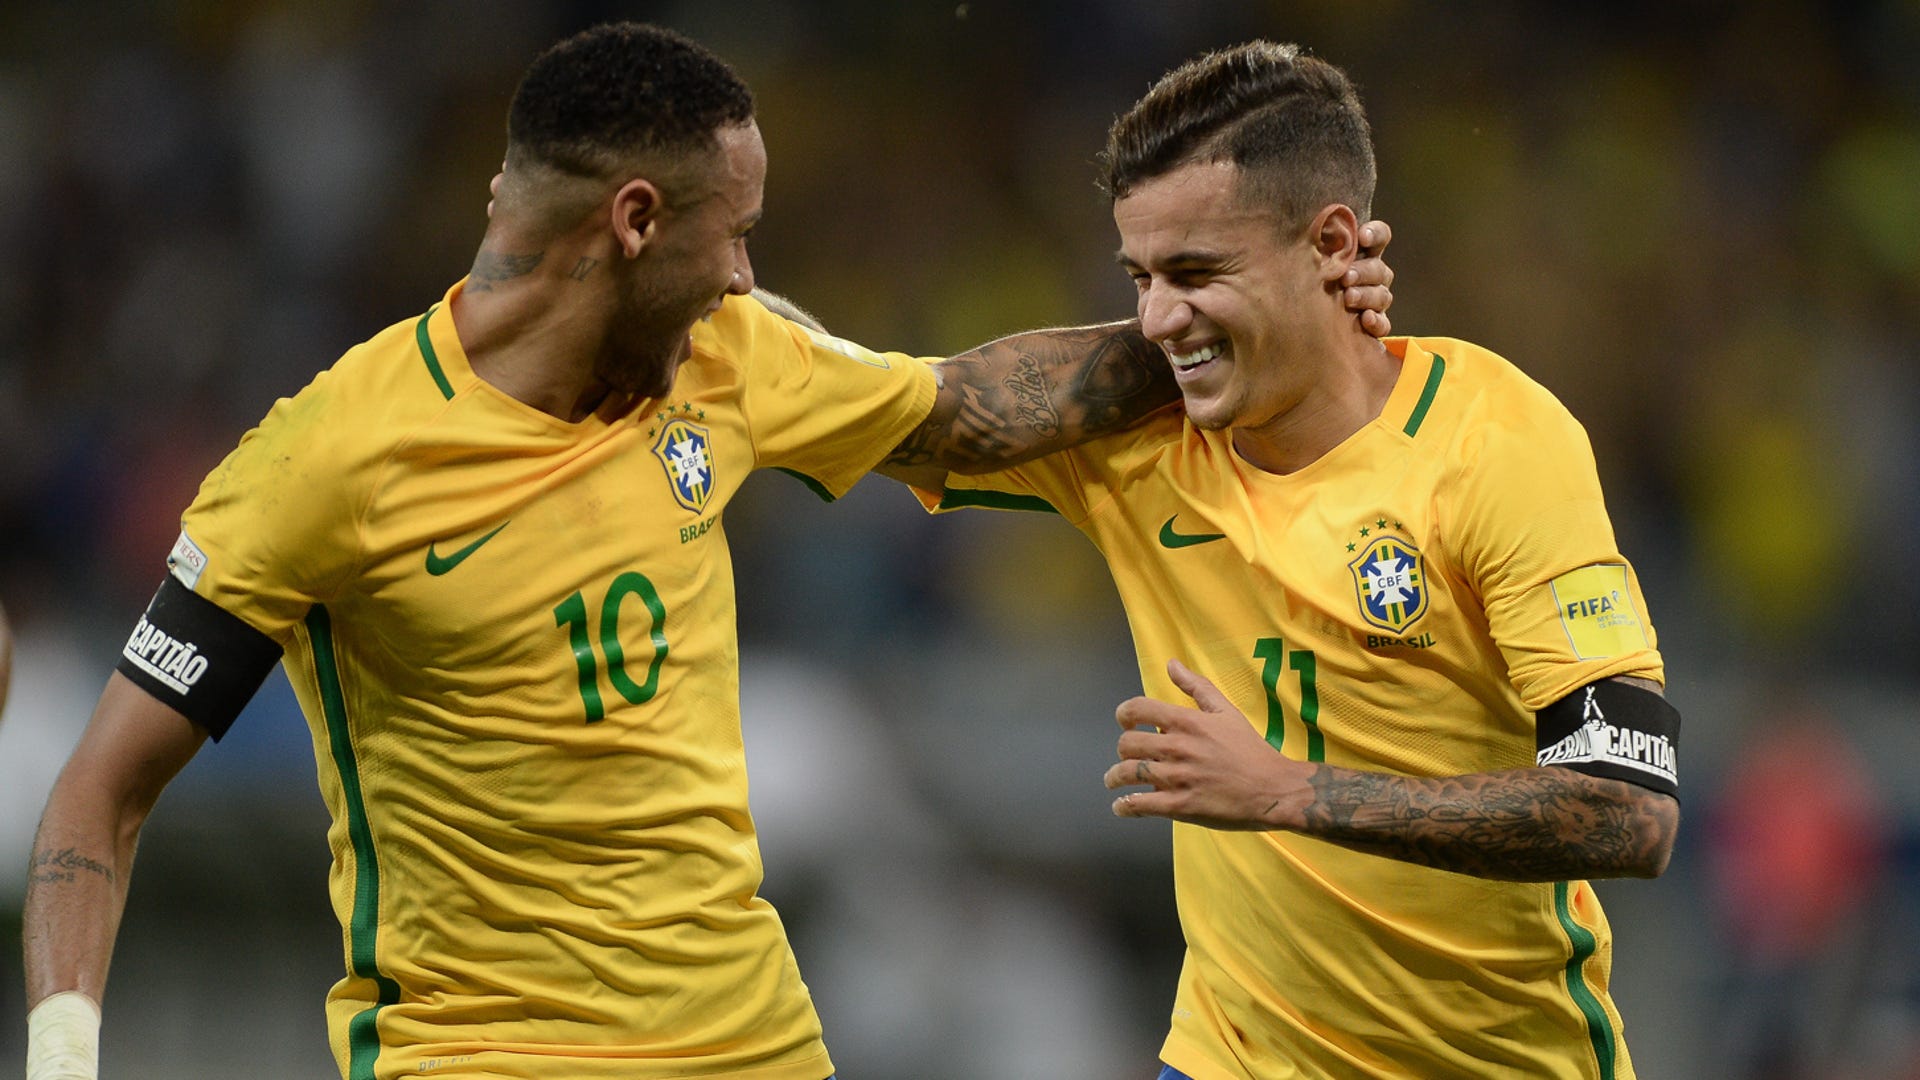 Brazil's U20s World Cup-winning class of 2011 boasted a midfield that's  made nearly £300m